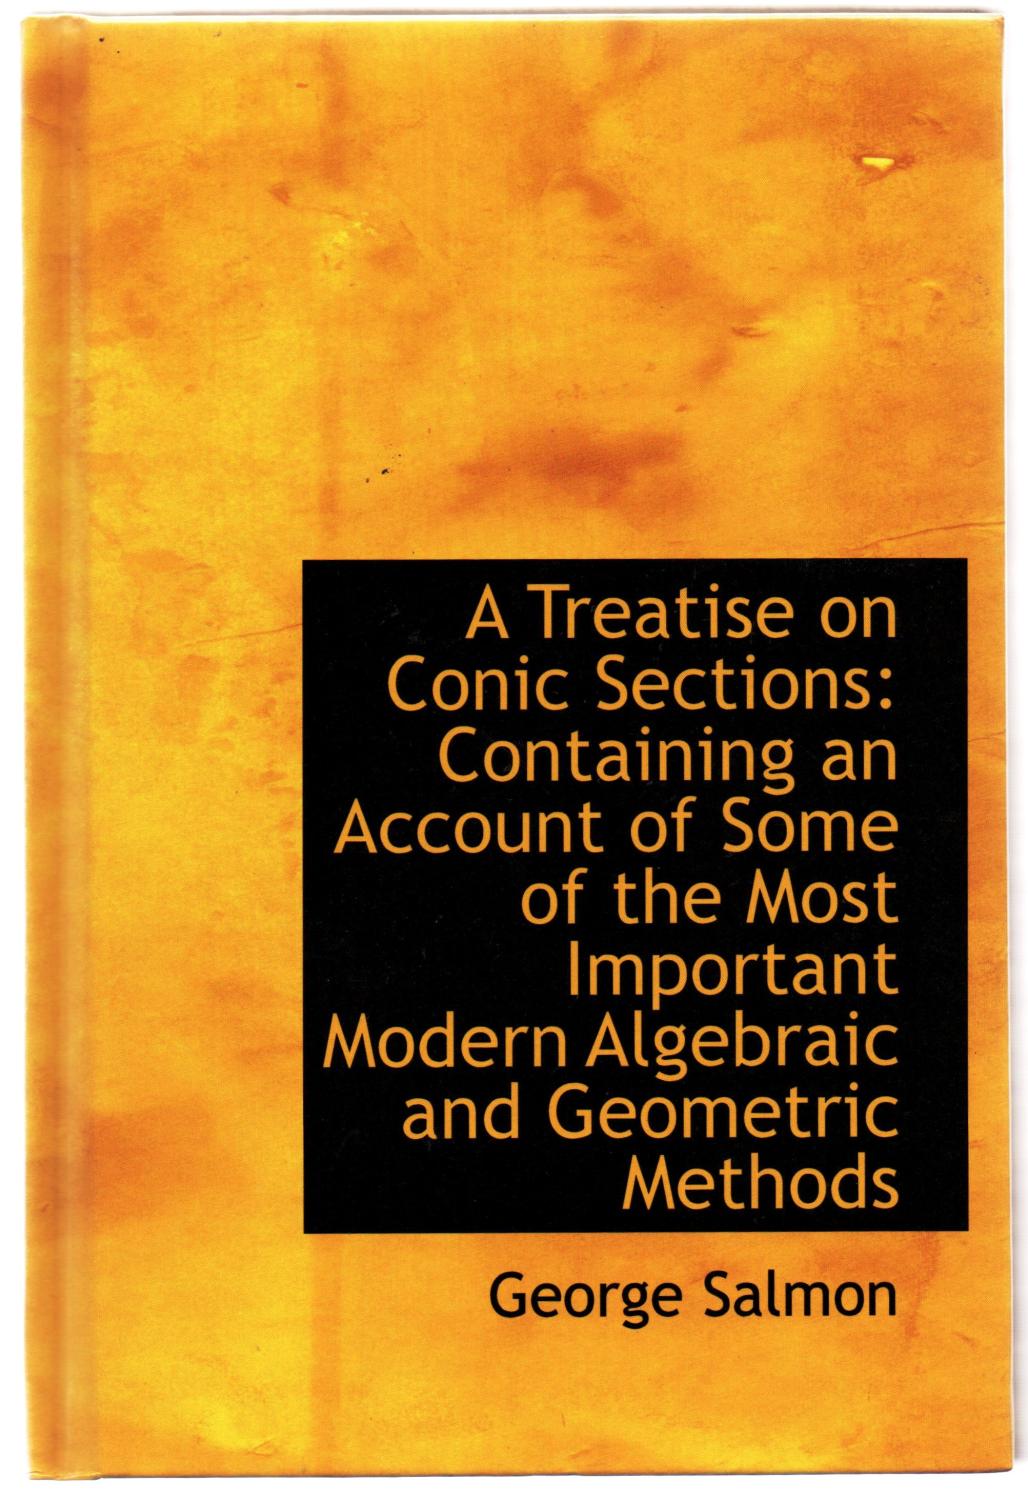 A Treatise on Conic Sections: Containing an Account of Some of the Most Important Modern Algebraic and Geometric Methods (Classic Reprint)